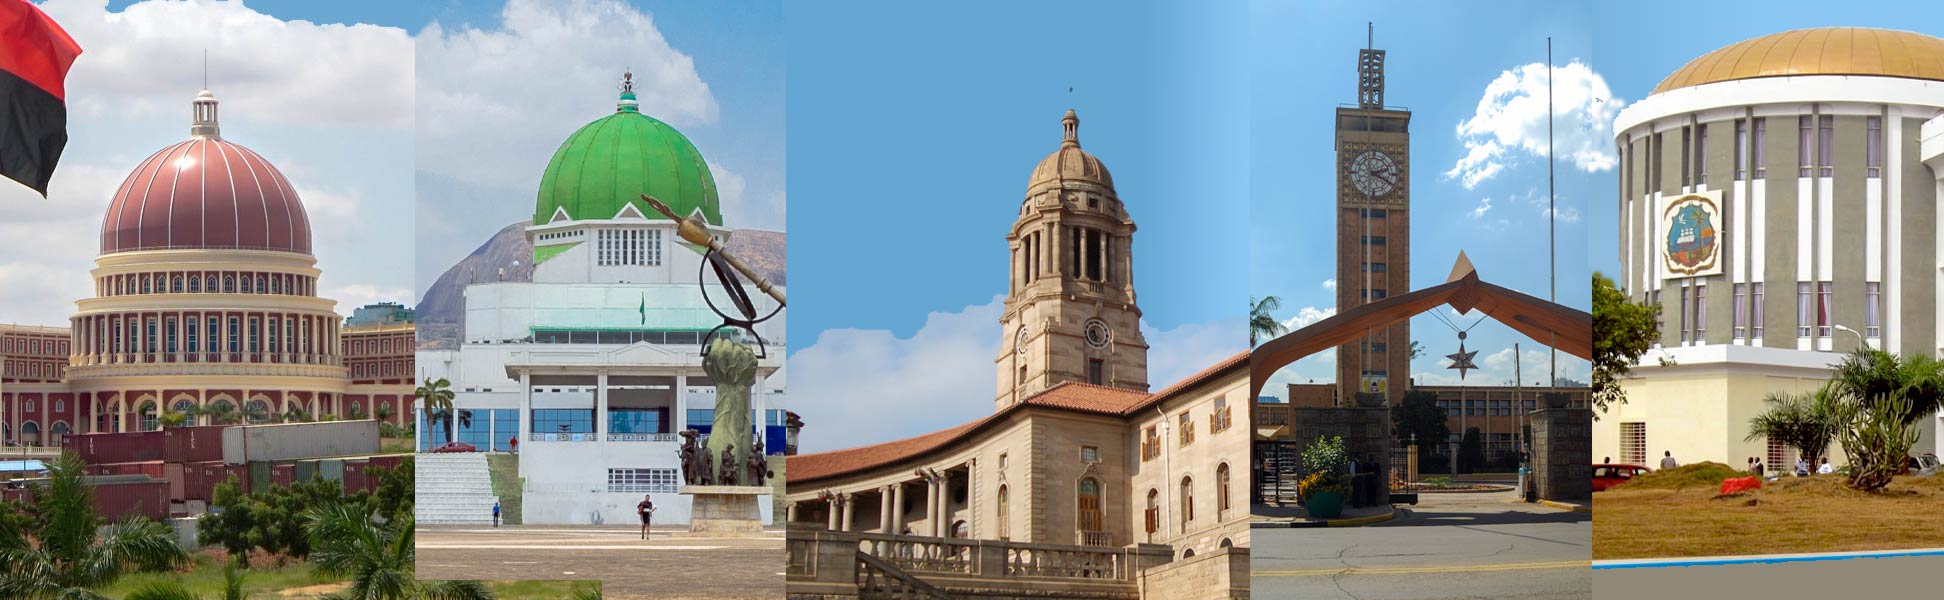 The National Assembly building in Luanda, Angola; the National Assembly building in Abuja, Nigeria, the Union Buildings in Pretoria, South Africa; the Parliament of Kenya in Nairobi; and the Capitol Building in Monrovia, Liberia.